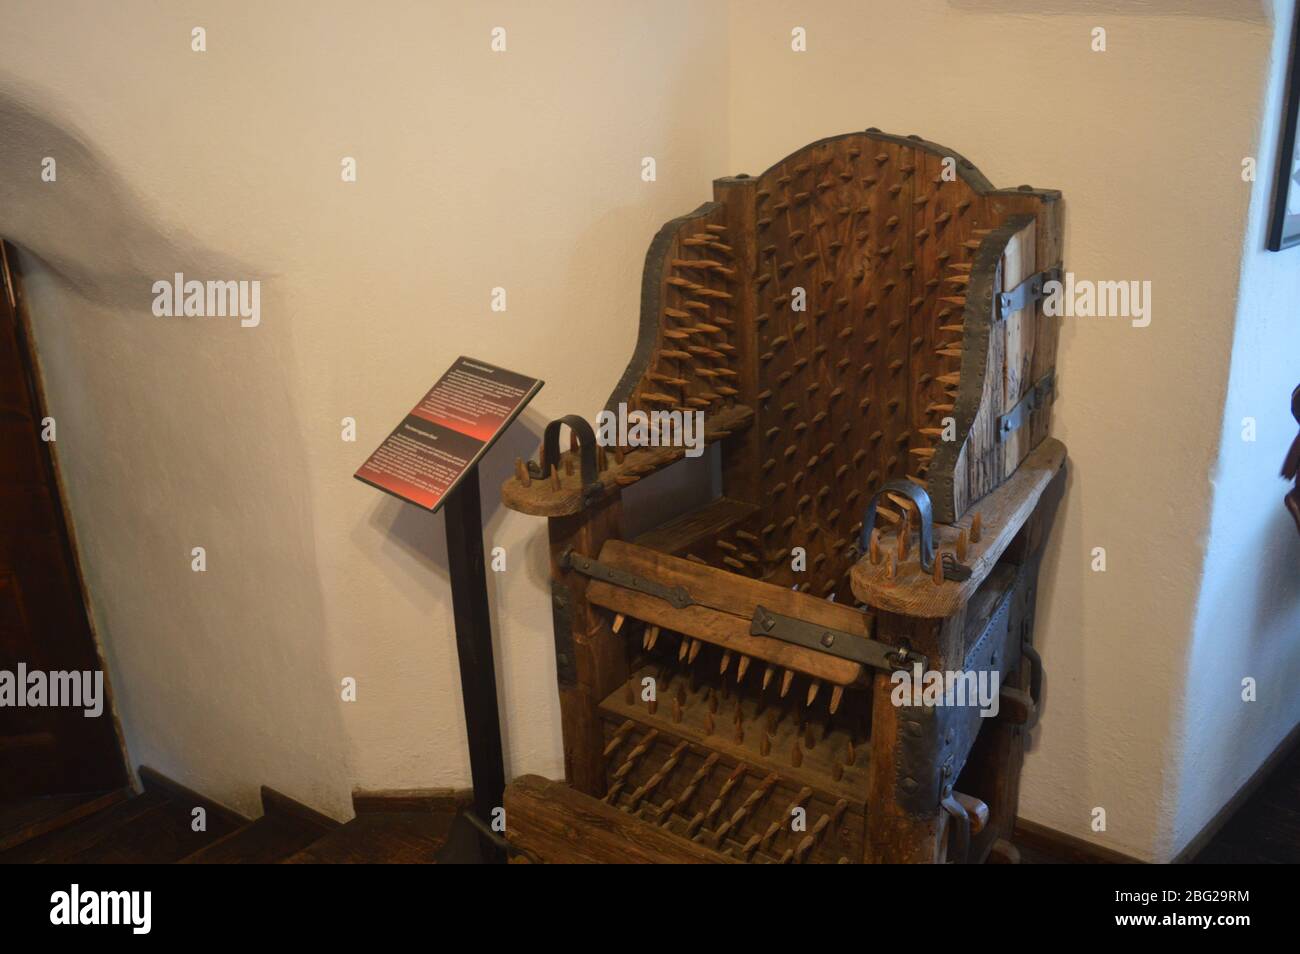 Torture devices on display at Bran Castle, Romania Stock Photo